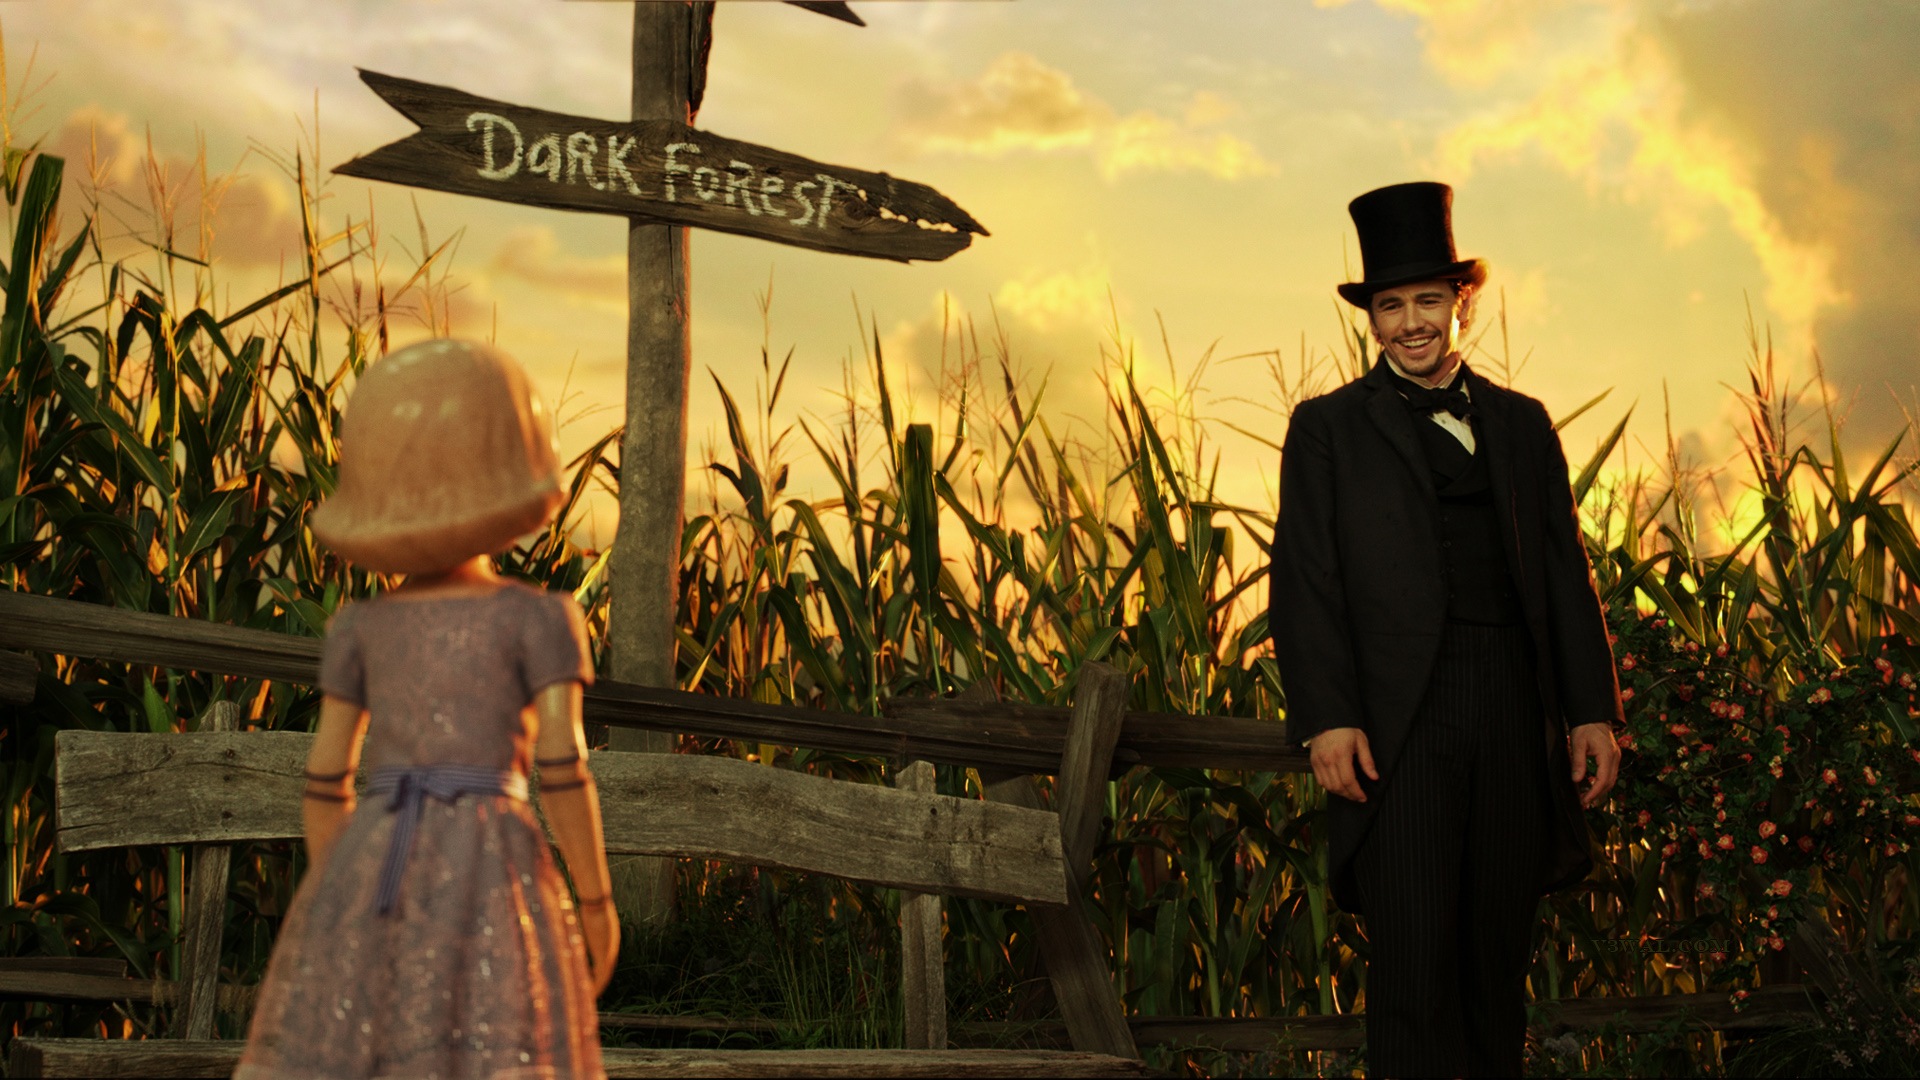 Oz The Great and Powerful 绿野仙踪 高清壁纸15 - 1920x1080